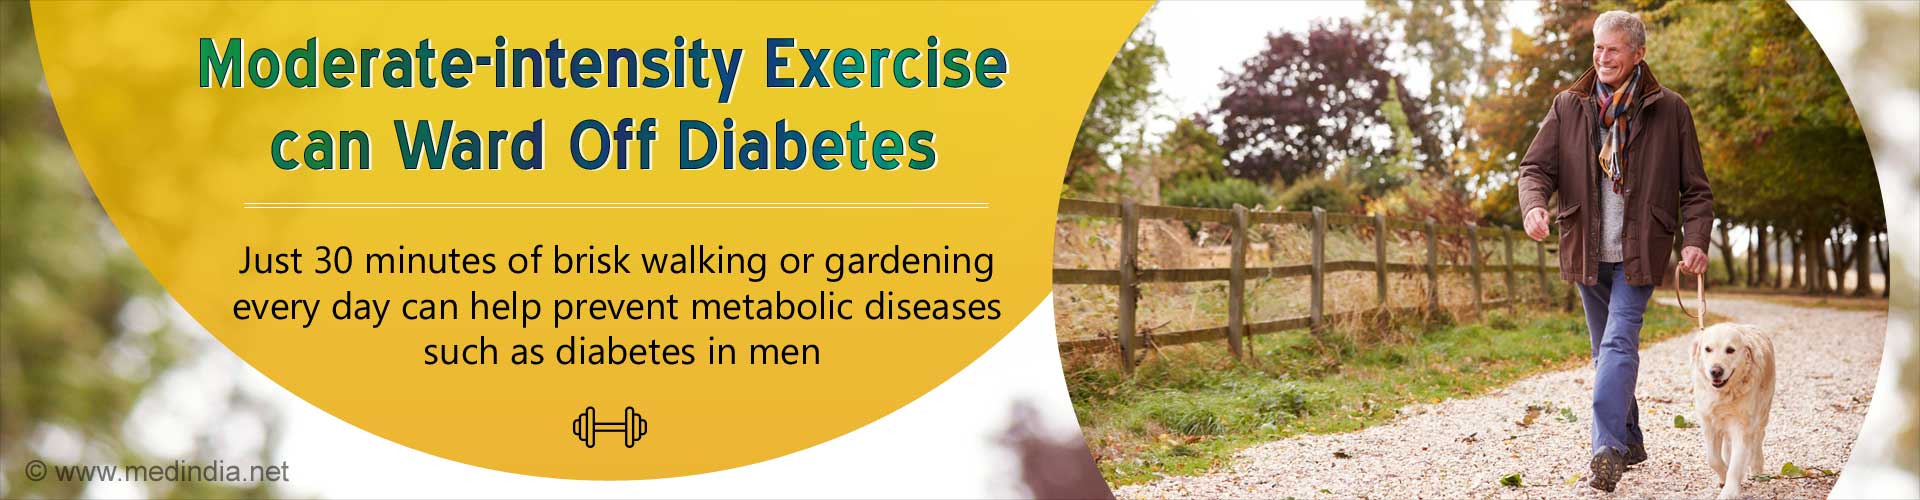 Moderate-intensity exercise can ward off diabetes. Just 30 minutes of brisk walking or gardening every day can help prevent metabolic diseases such as diabetes in men.